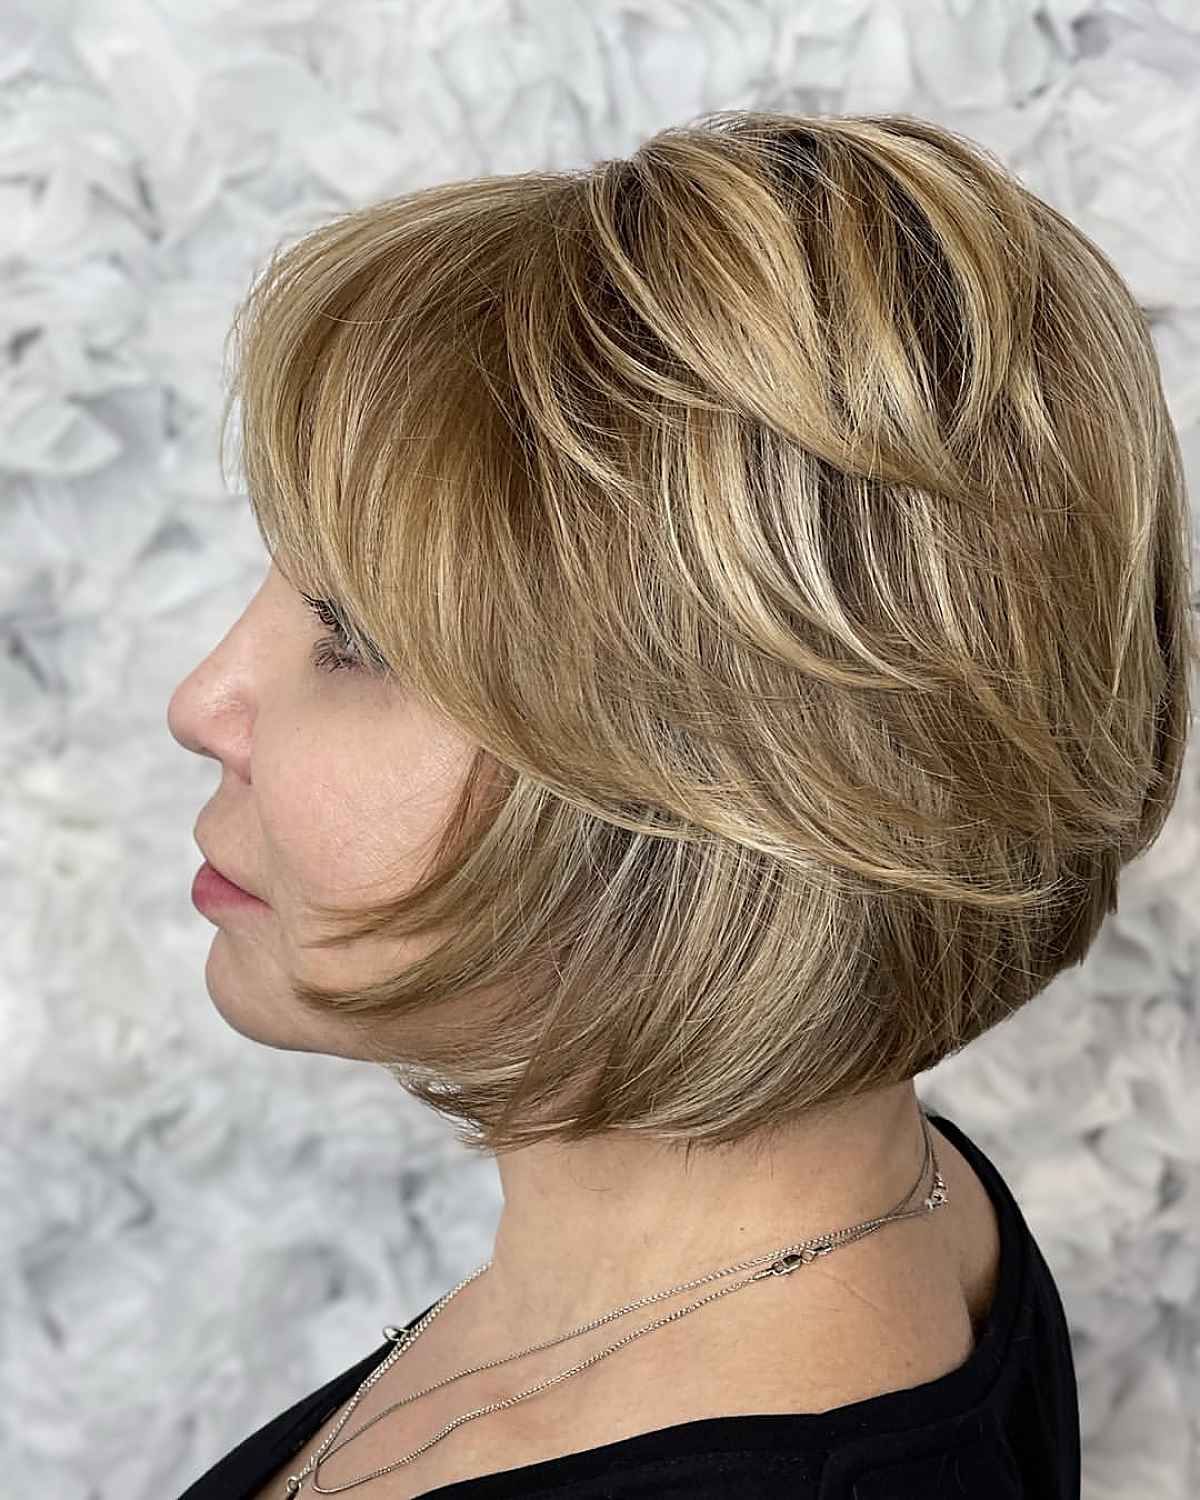 16 Cutest Chin Length Layered Bobs For A Fresh, Short Look Throughout Chin Length Graduated Bob Hairstyles (View 2 of 25)